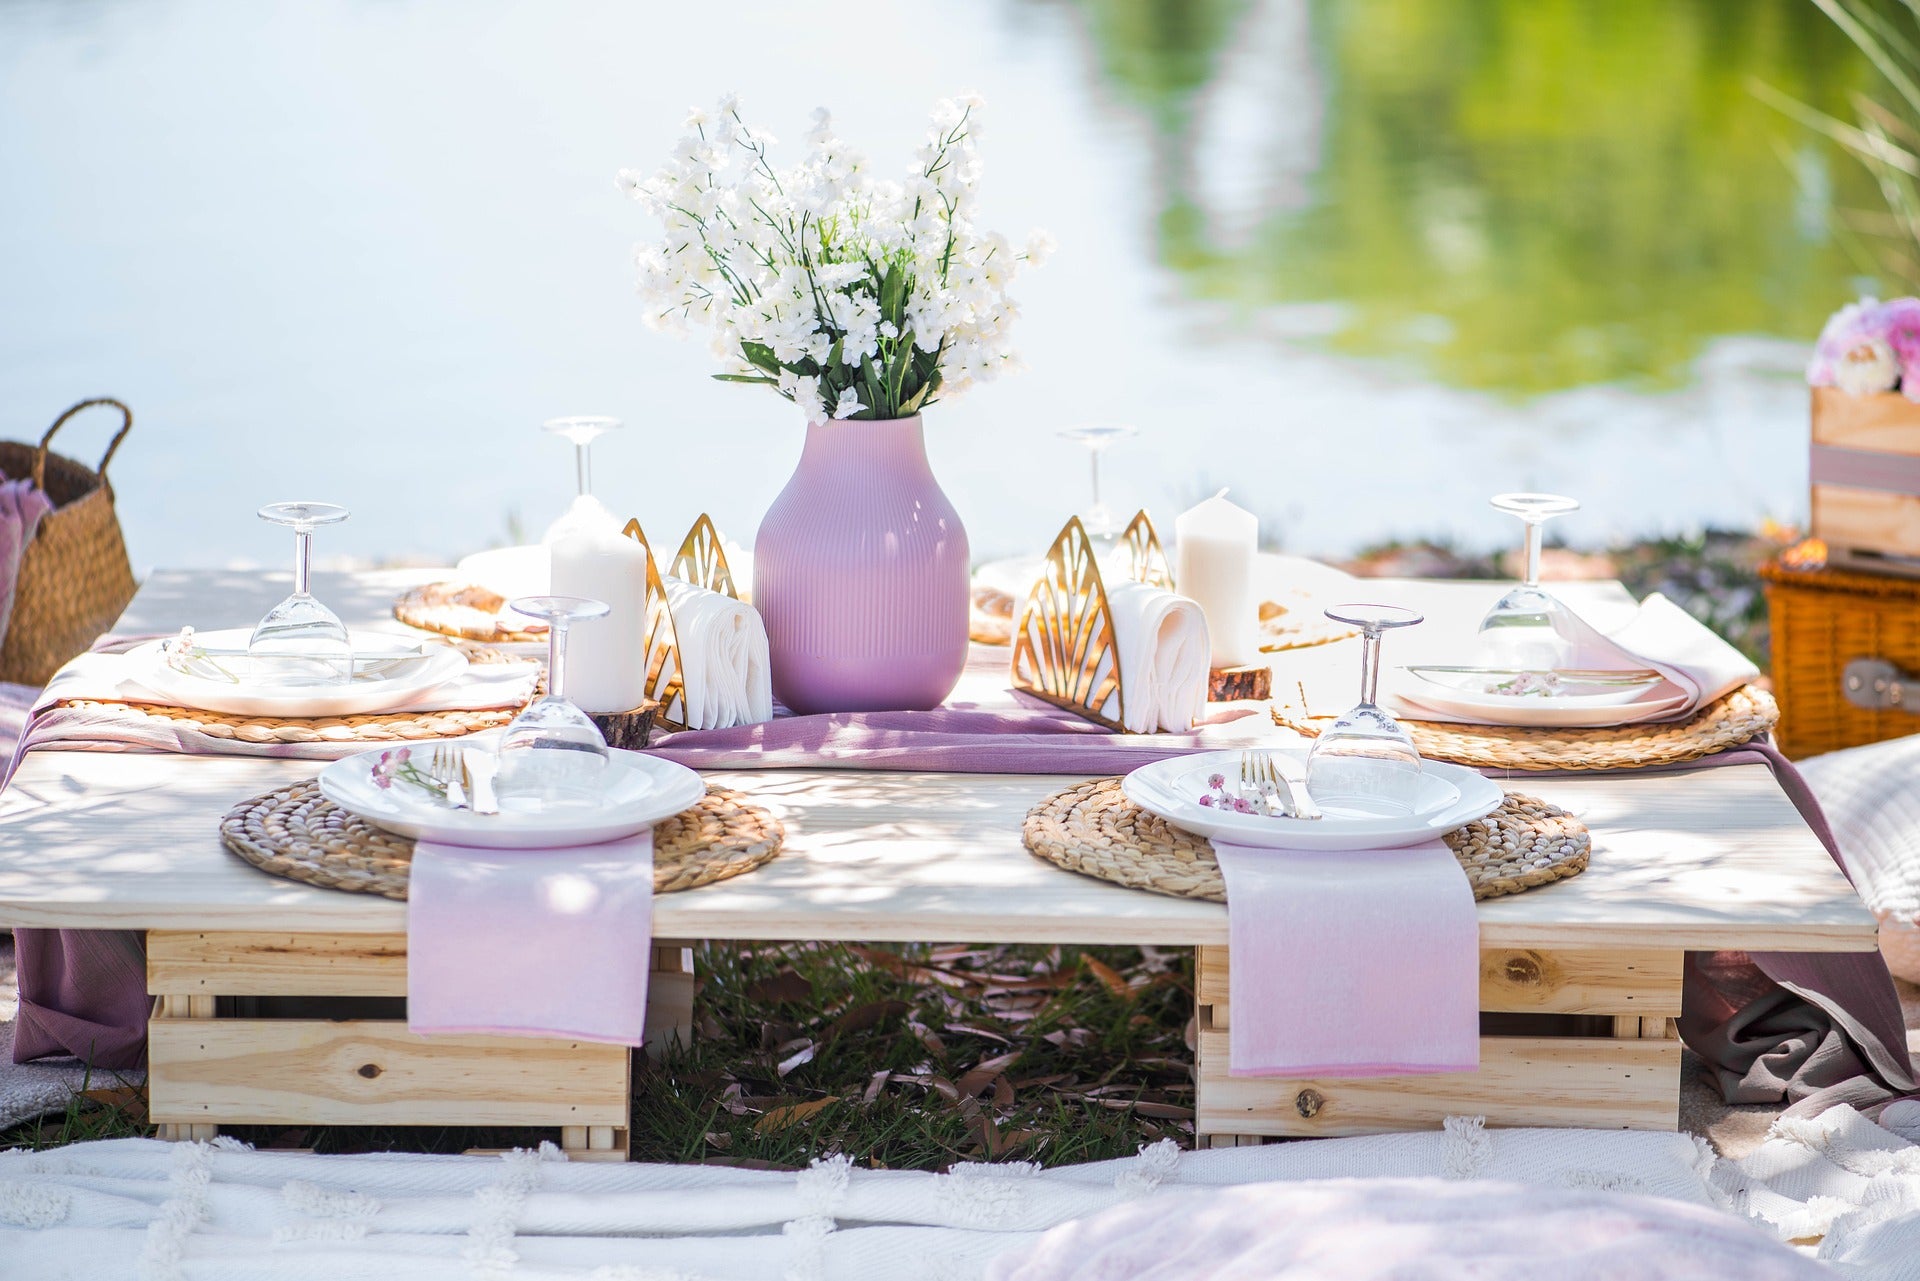 From Blanket to Basket: Creating a Dreamy Spring Picnic Setup